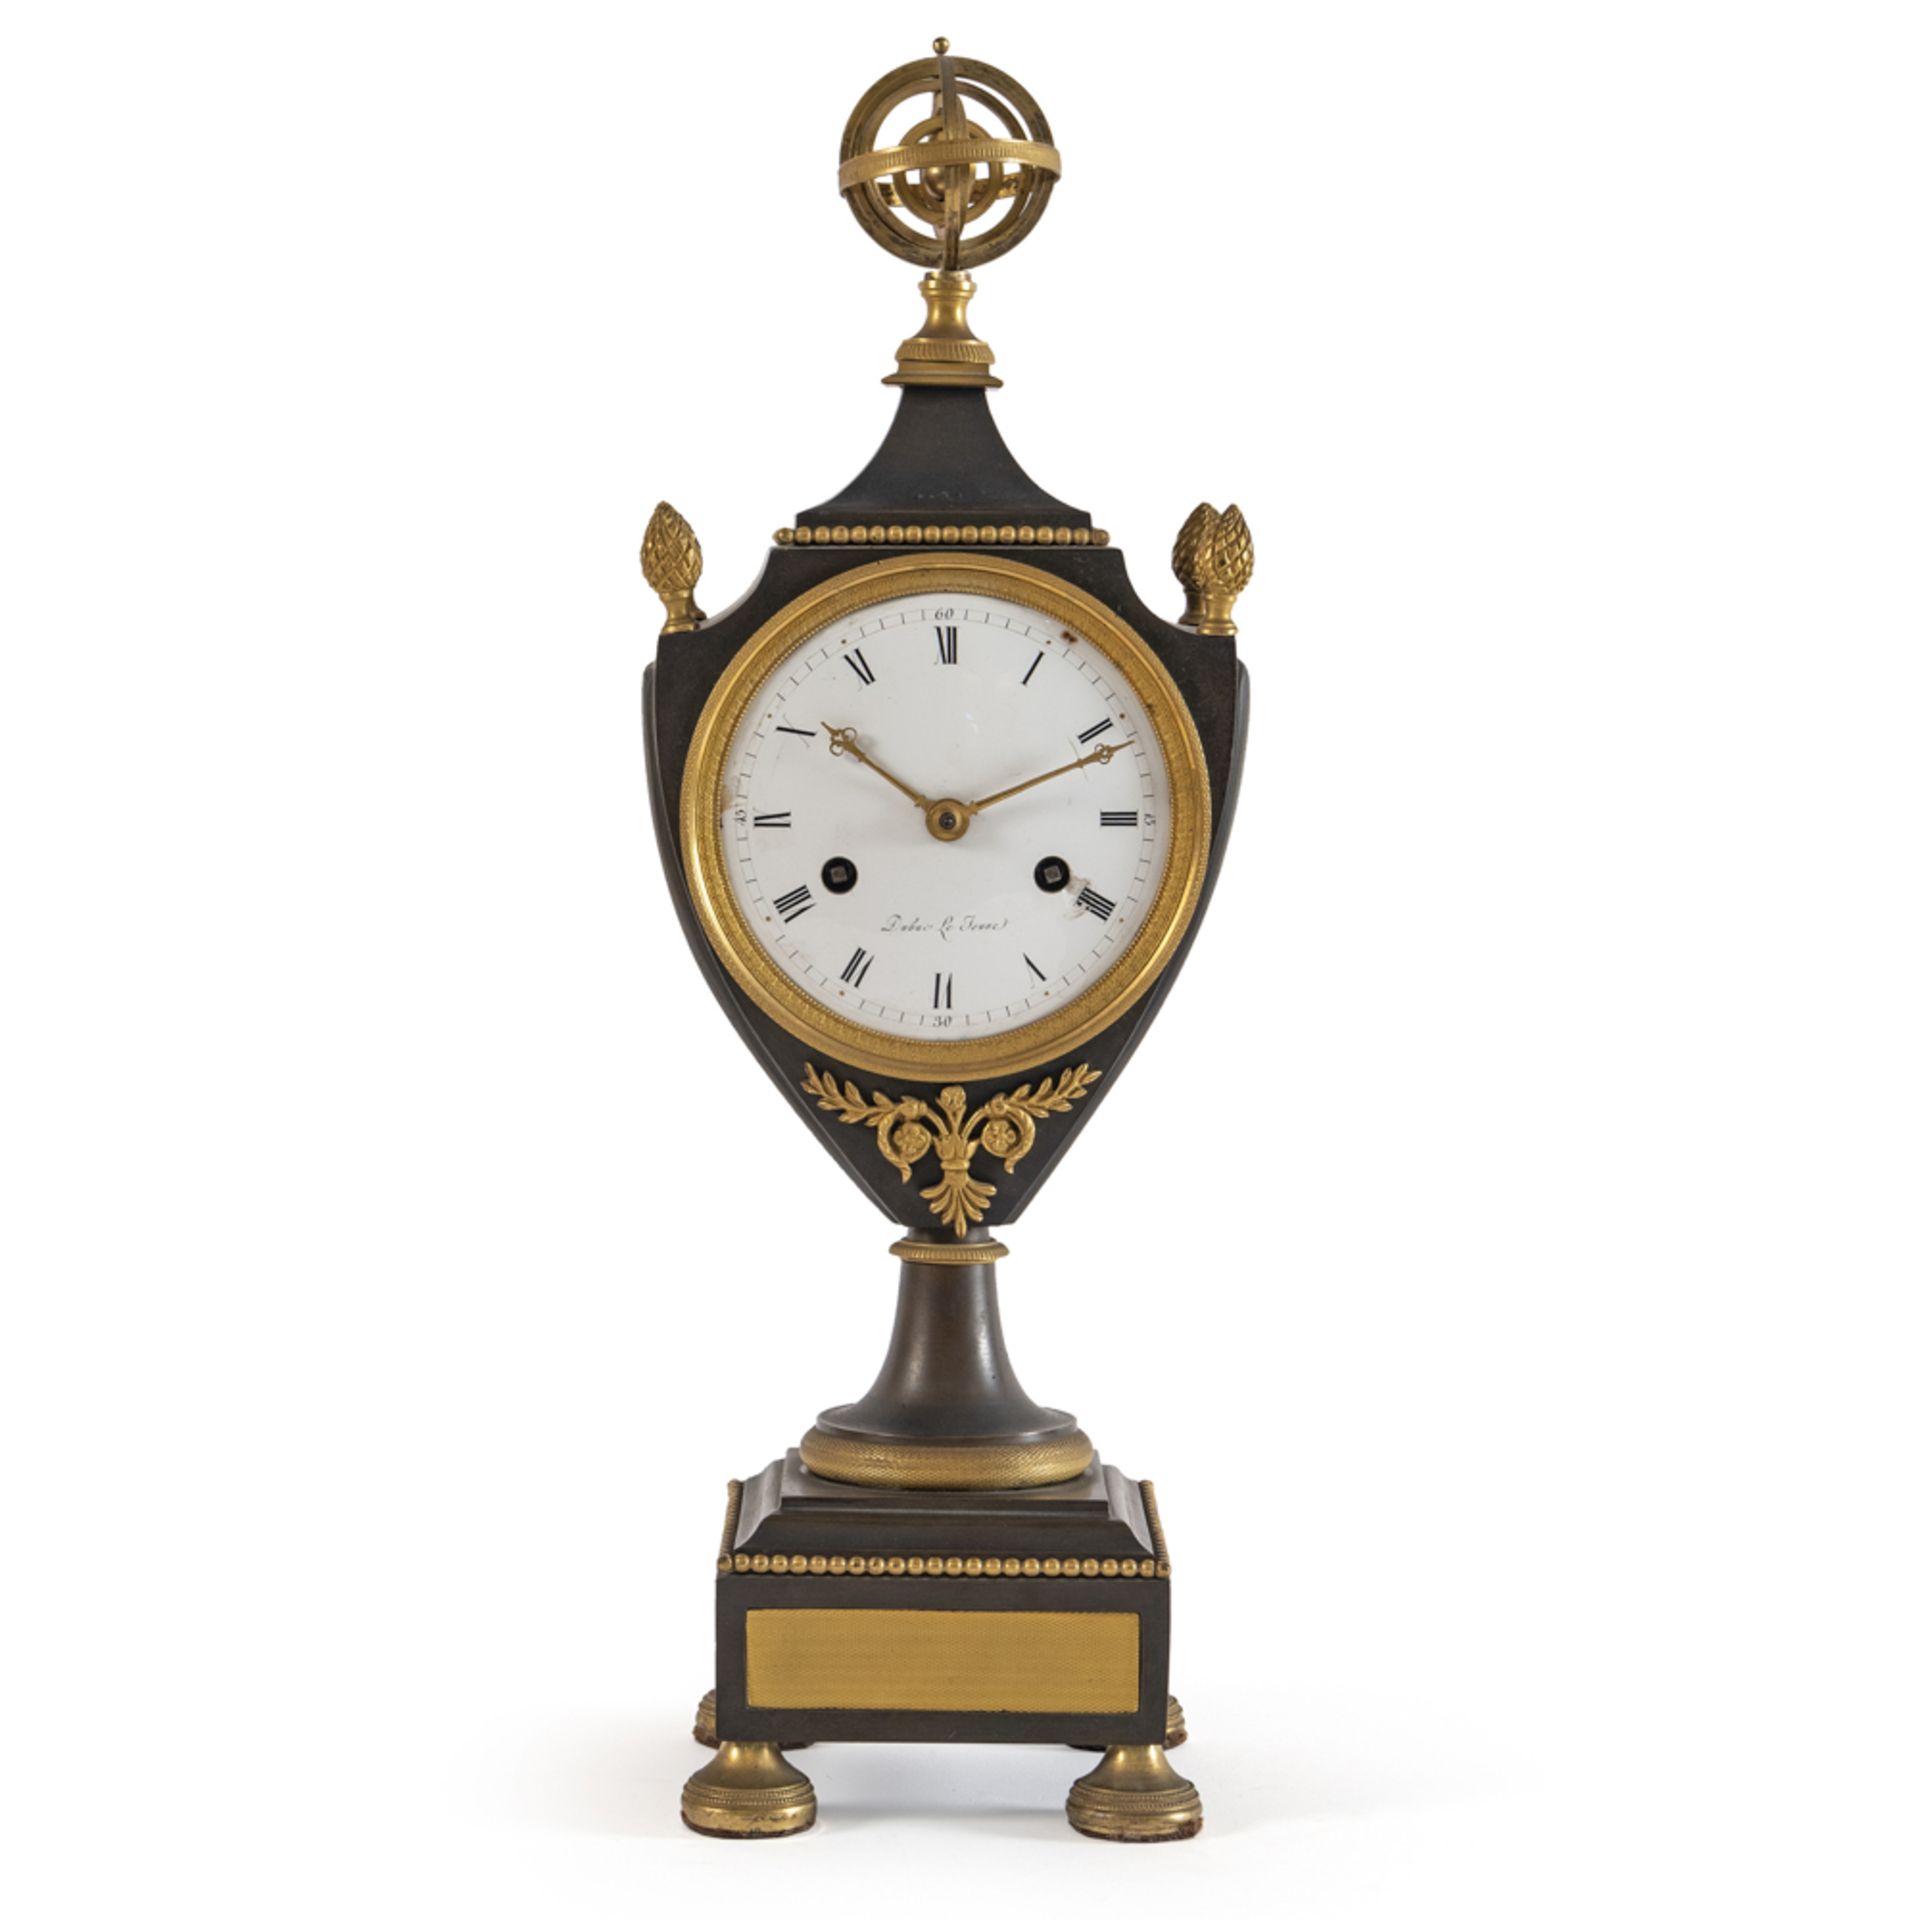 Burnished and gilded bronze table clock